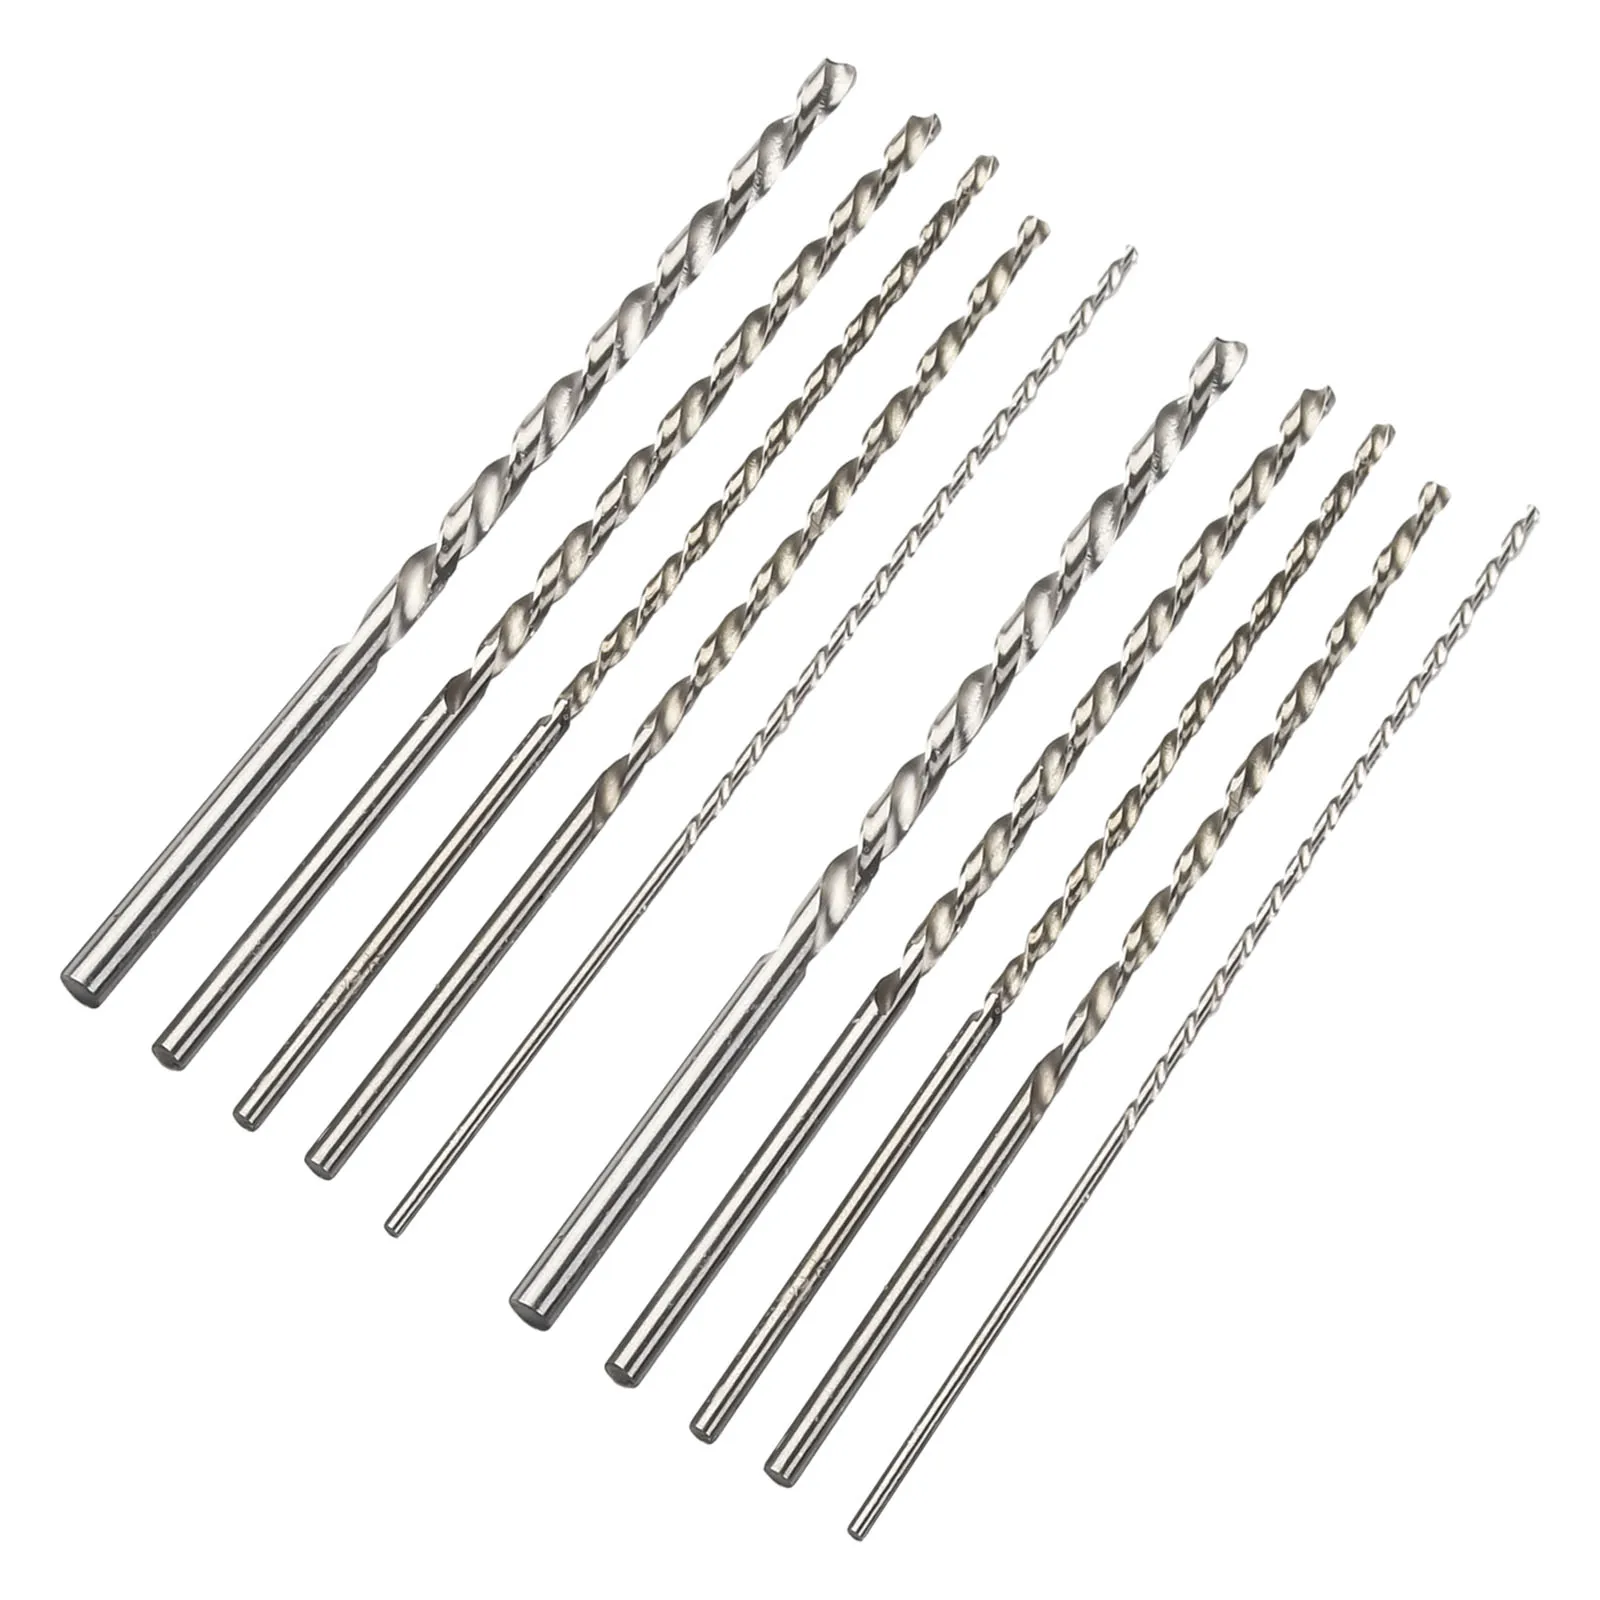 High Speed Steel Bit Set Extra Long HSS Straight Drill Bits Power Tools  For Metal Wood Glass 10Pcs 2mm 3mm 3.5mm 4mm 5mm sideboards 2 pcs high gloss white 60x30x70 cm engineered wood